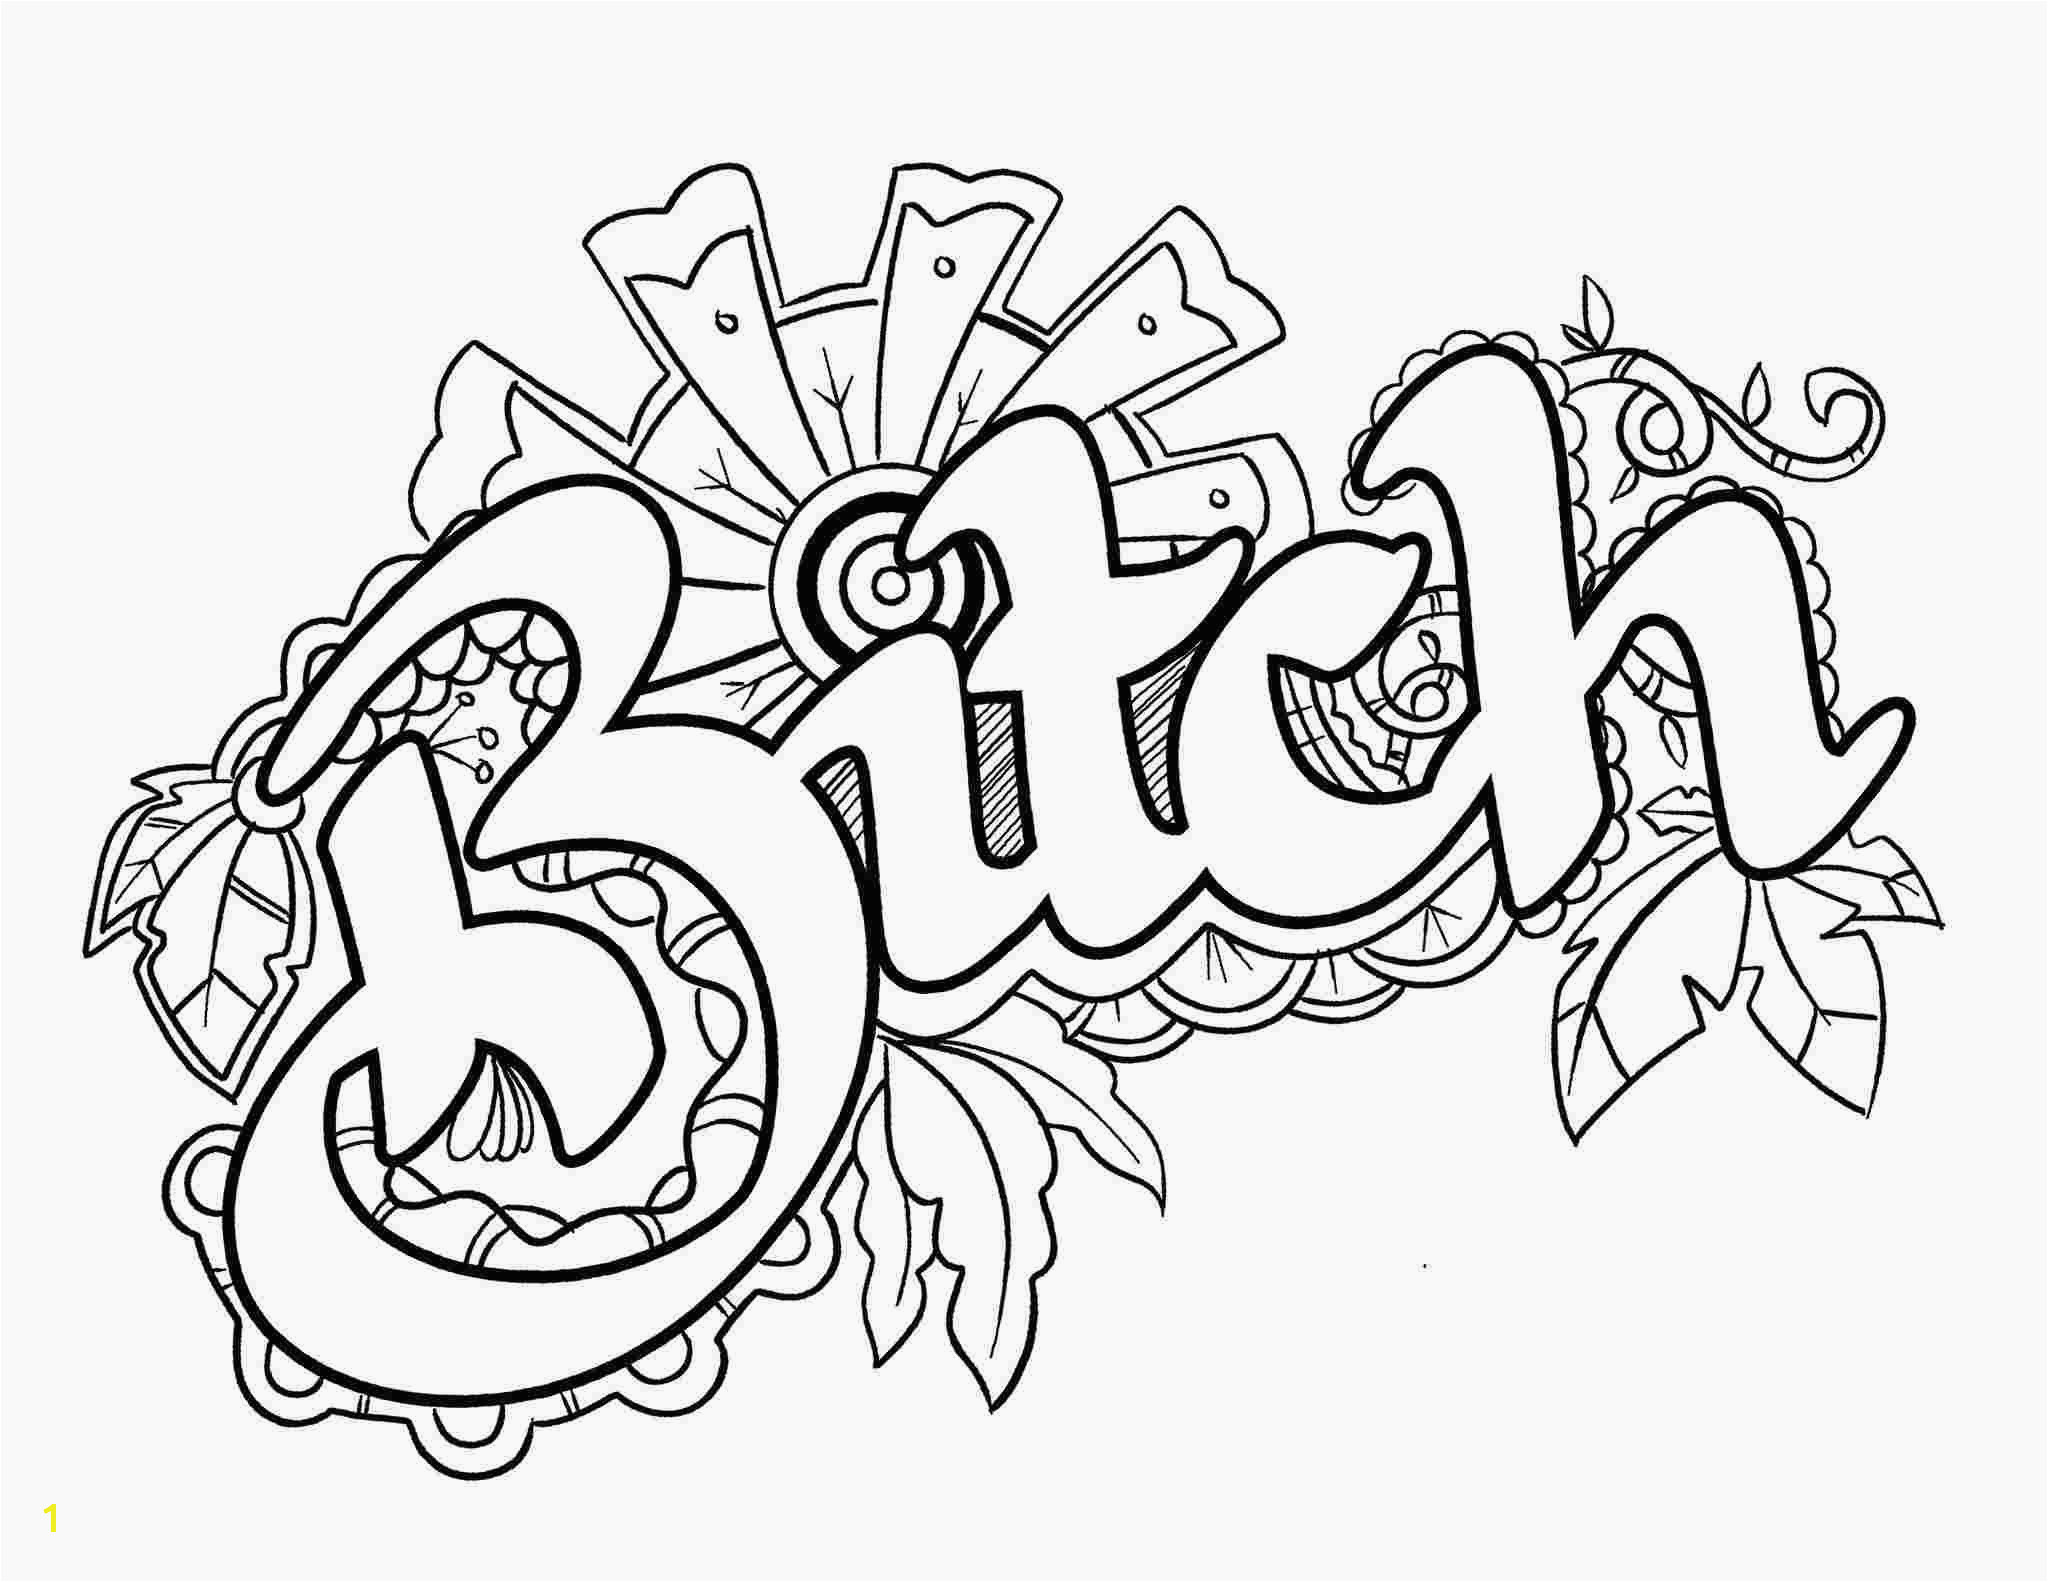 Free Printable Coloring Pages for Adults Swear Words Swear Word Coloring Pages Pdf Coloring Pages